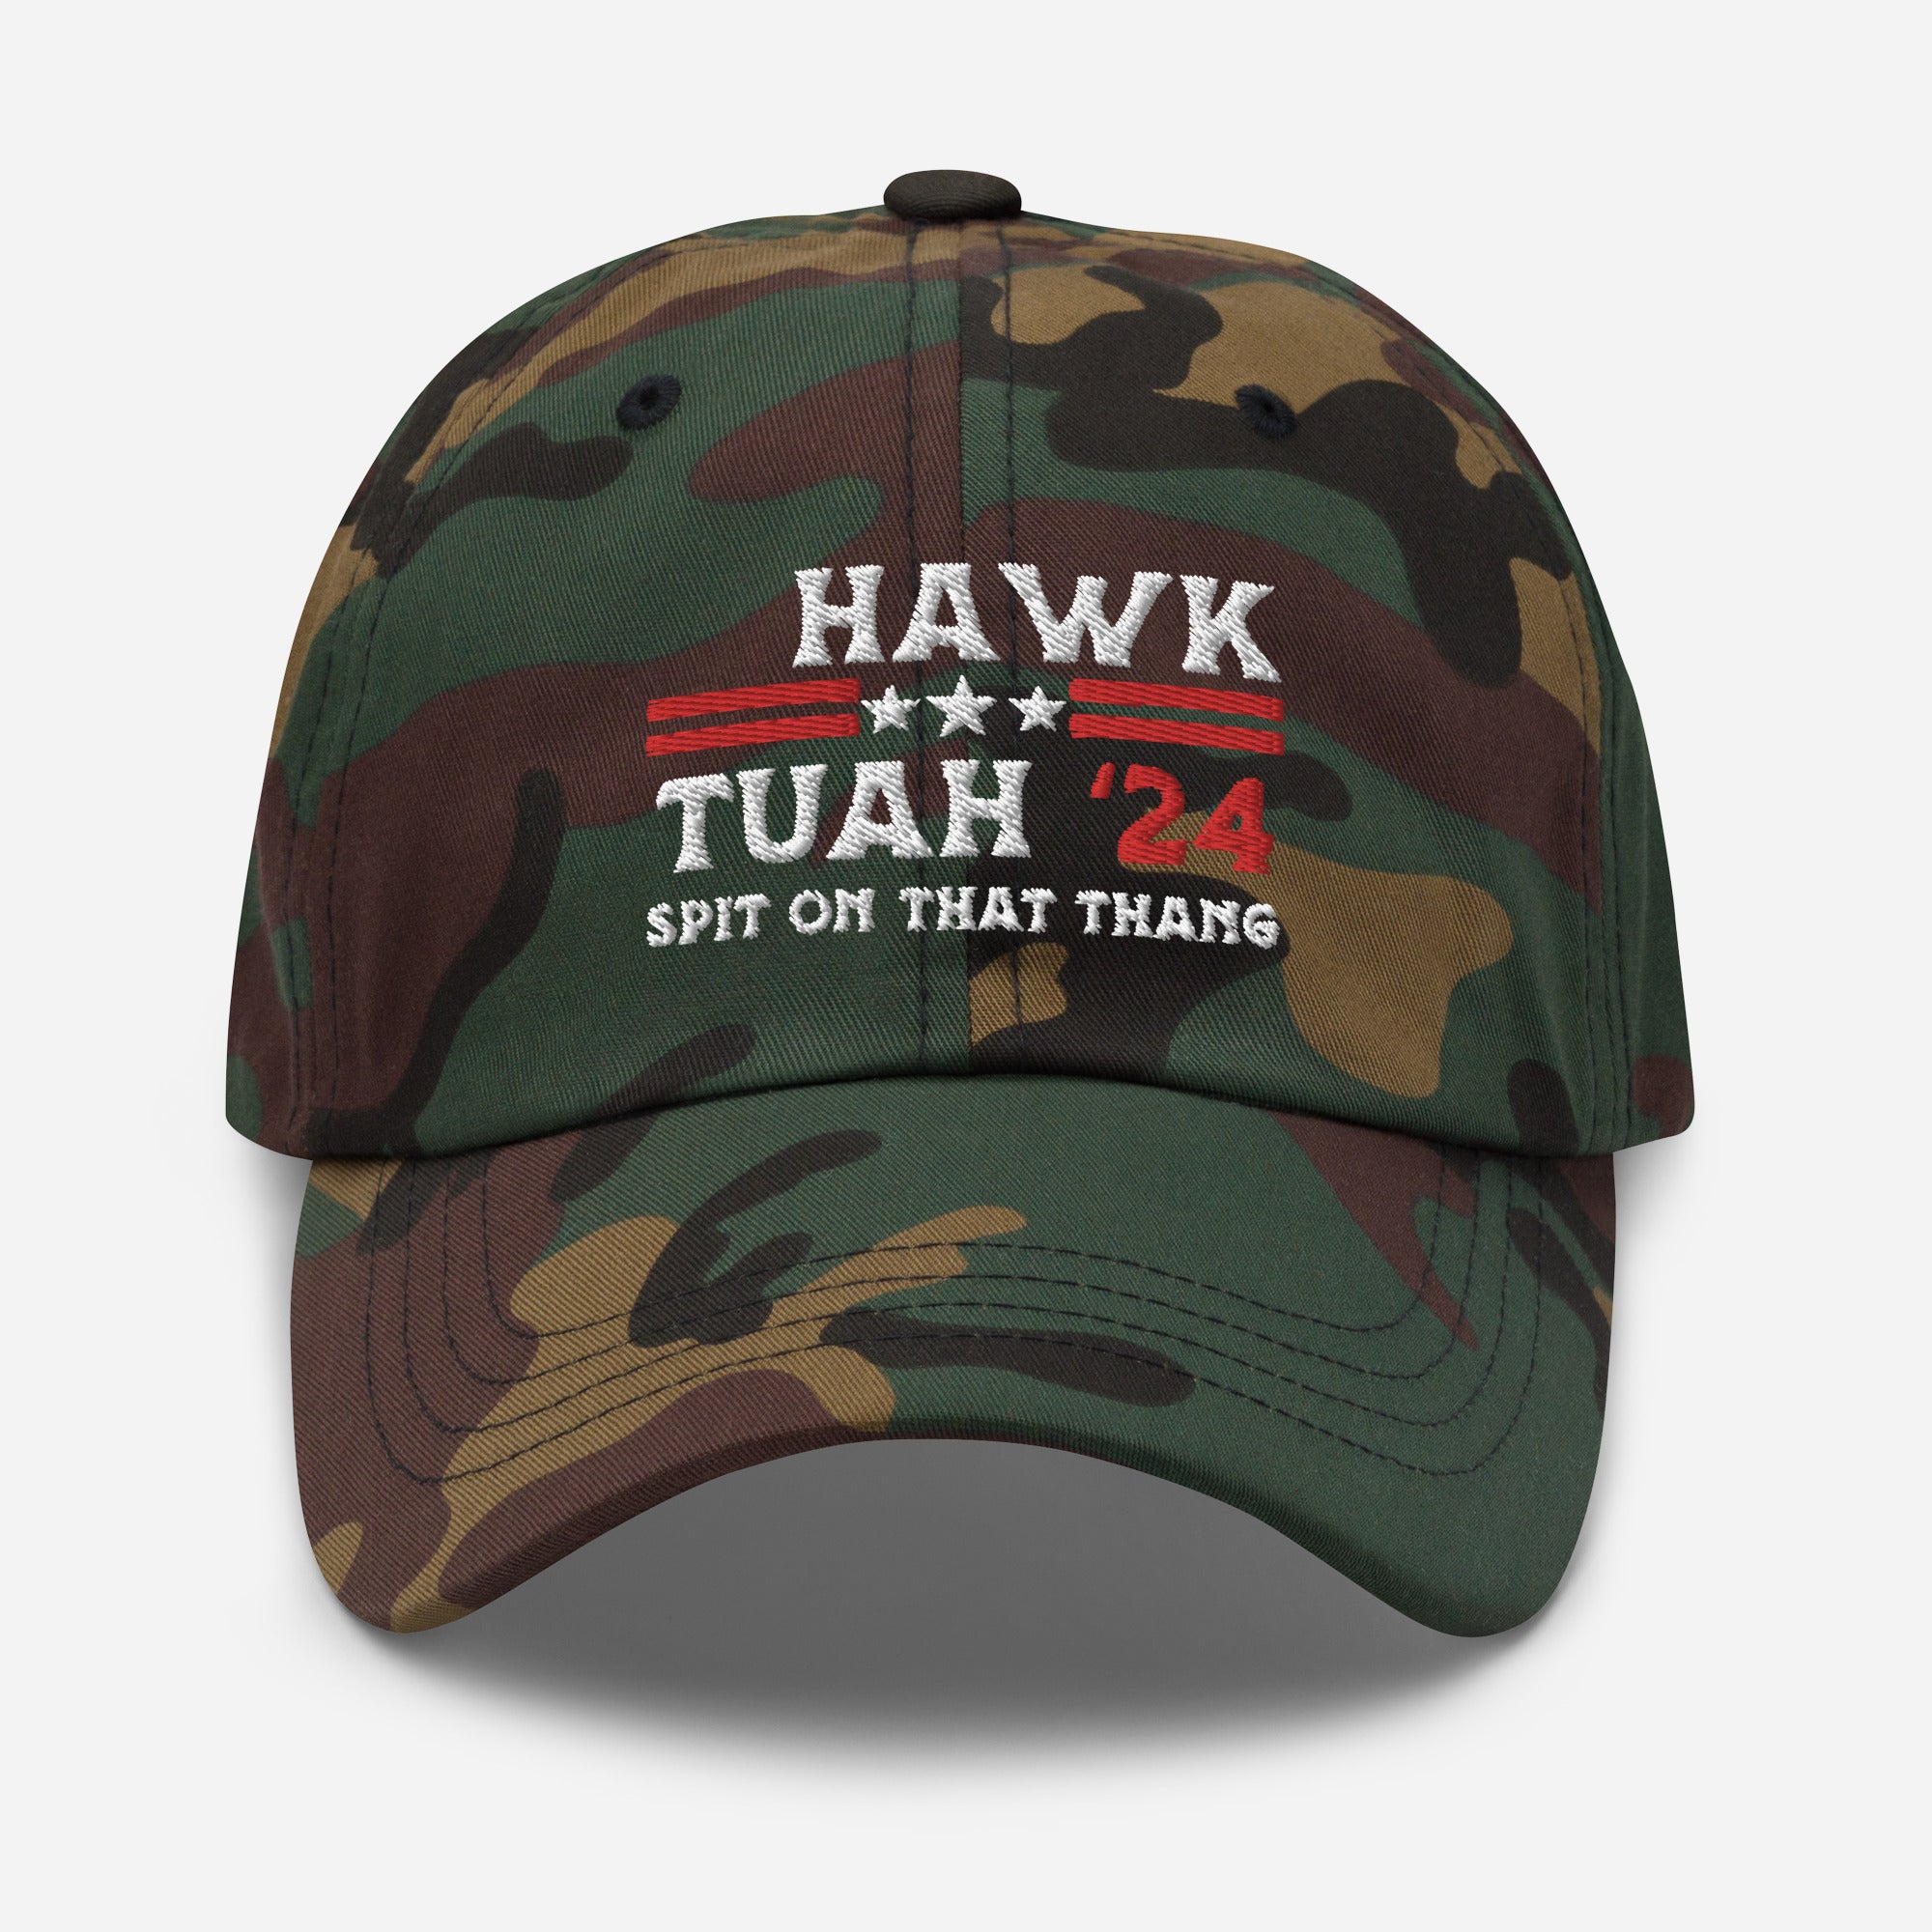 Hawk Tuah Hat, Spit On That Thang, Hawk Tuah 2024, Funny Adult Humor Hats, Viral Hat, Inappropriate Dad Hat, Popular Humor Gift Hats